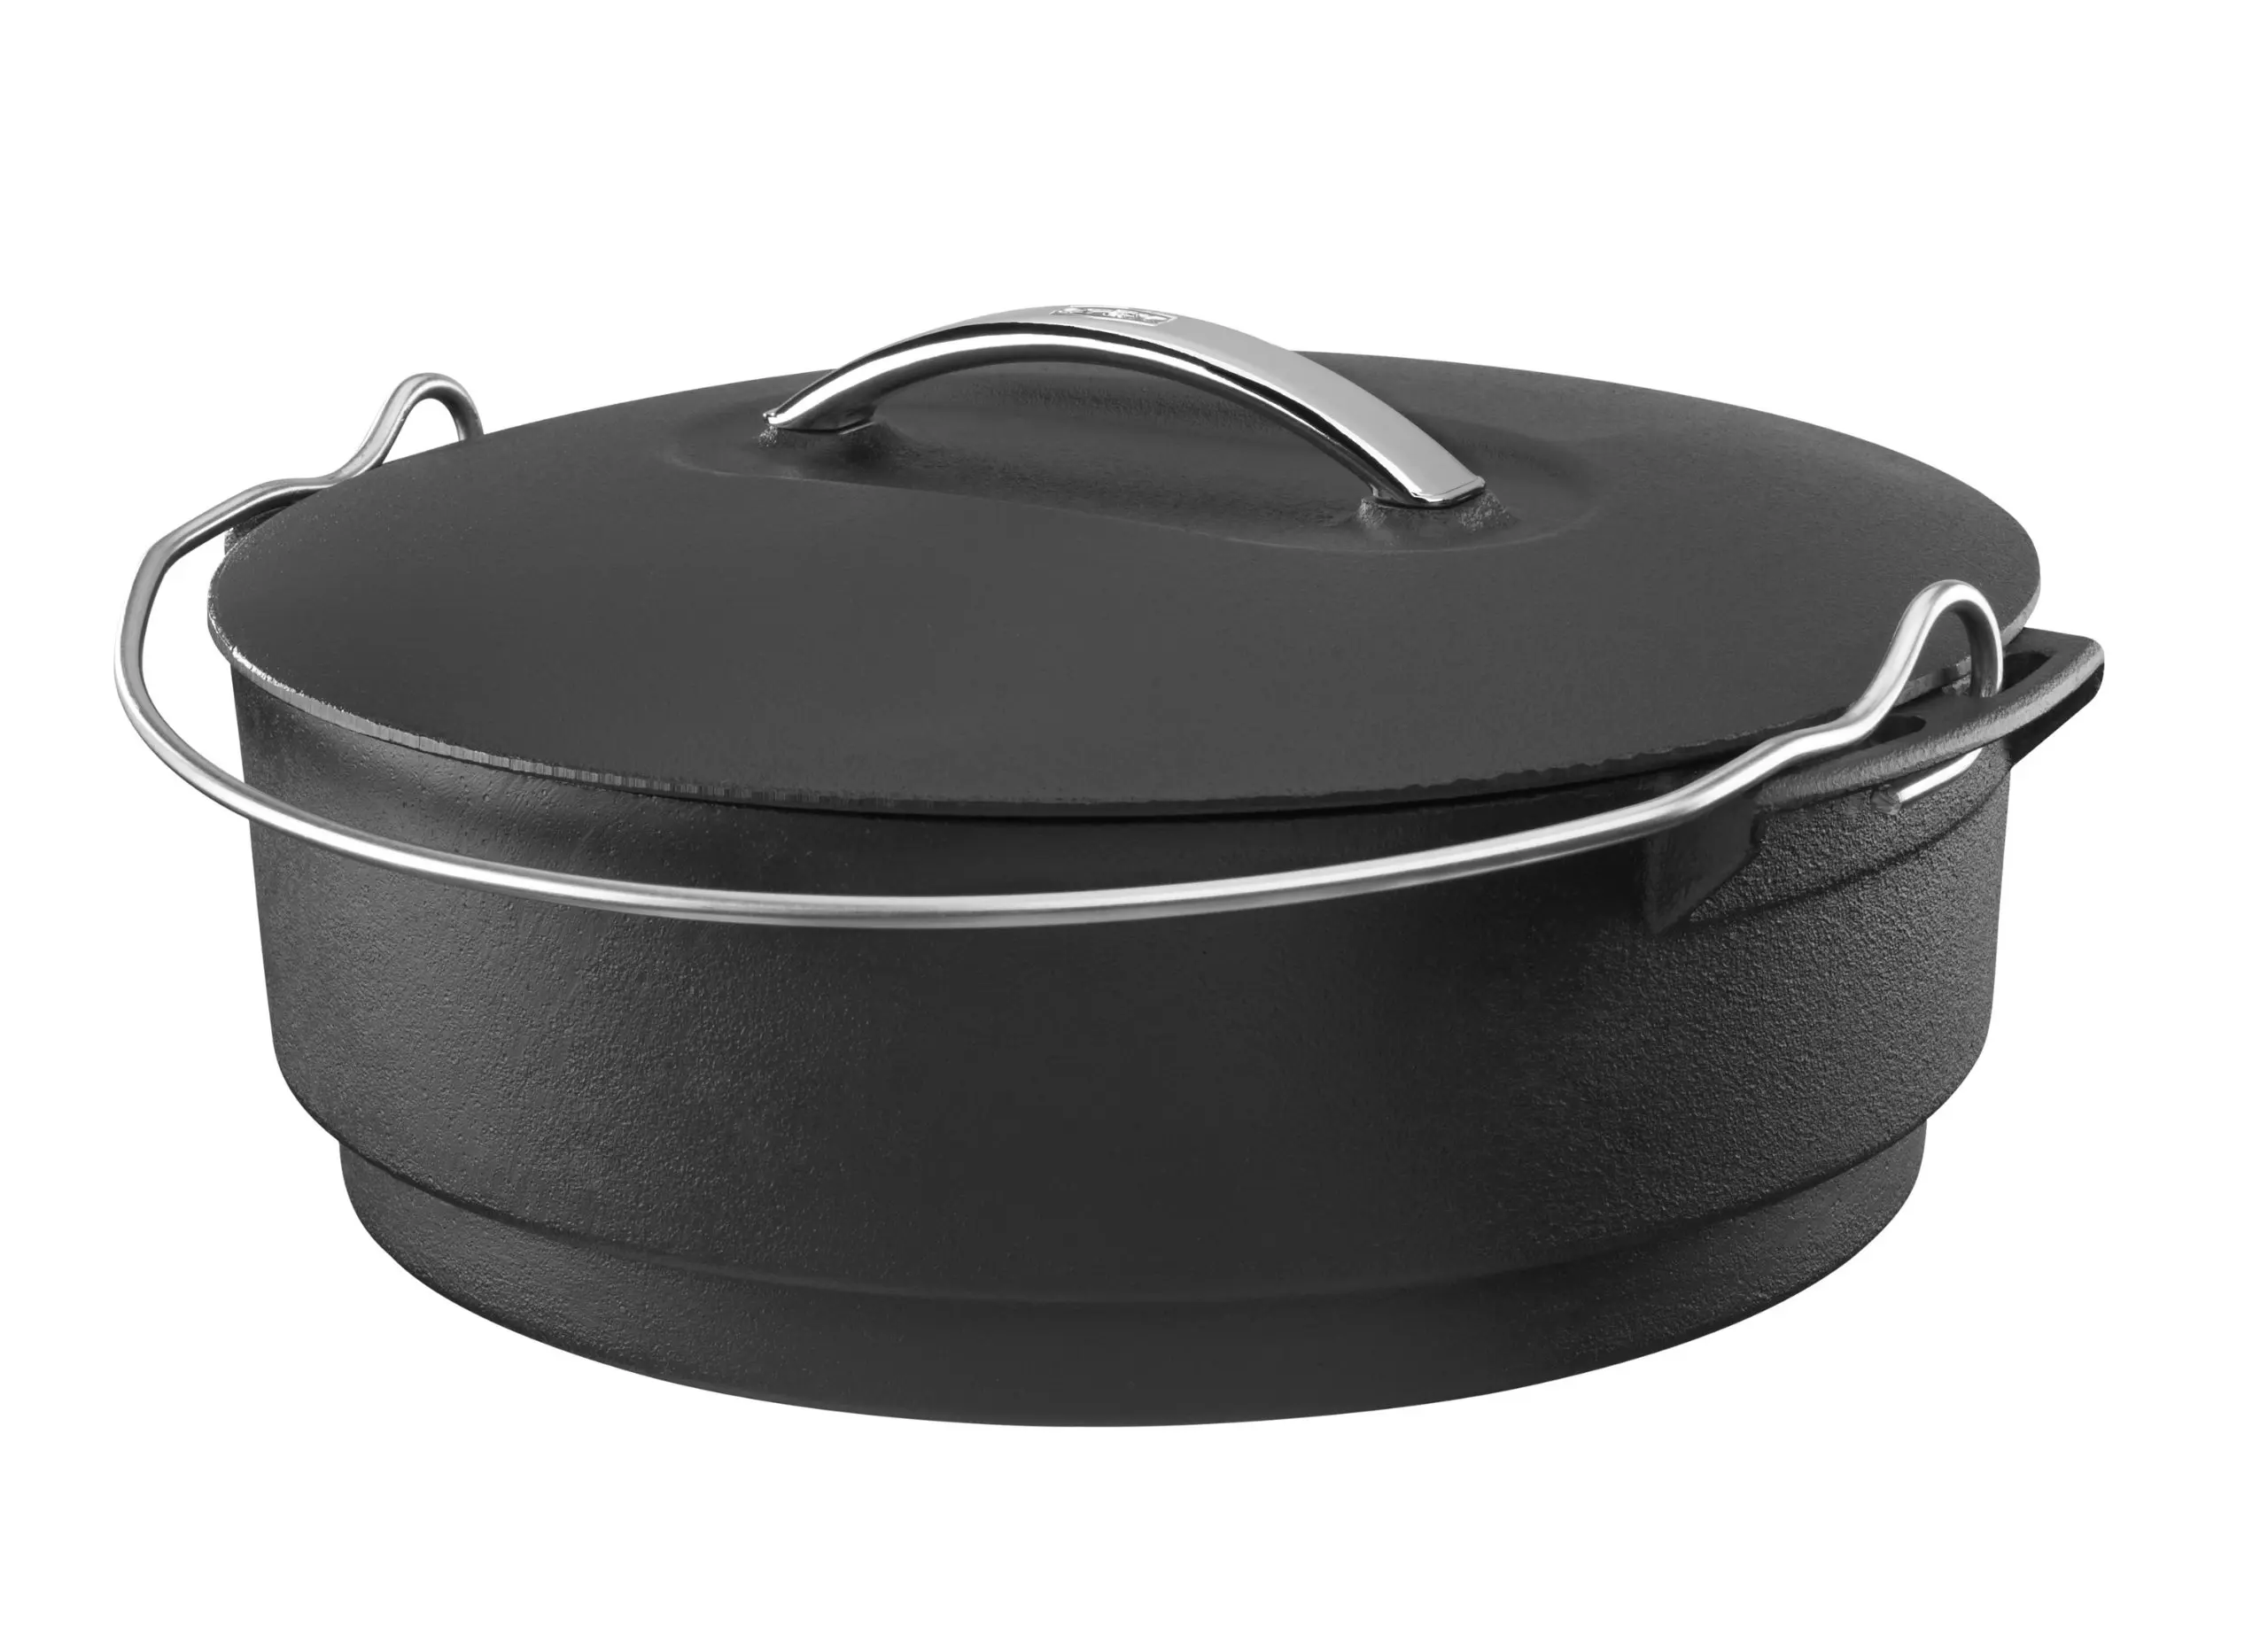 Stok SIS1020 Grills Cast Iron Kettle Insert for Grilling. 